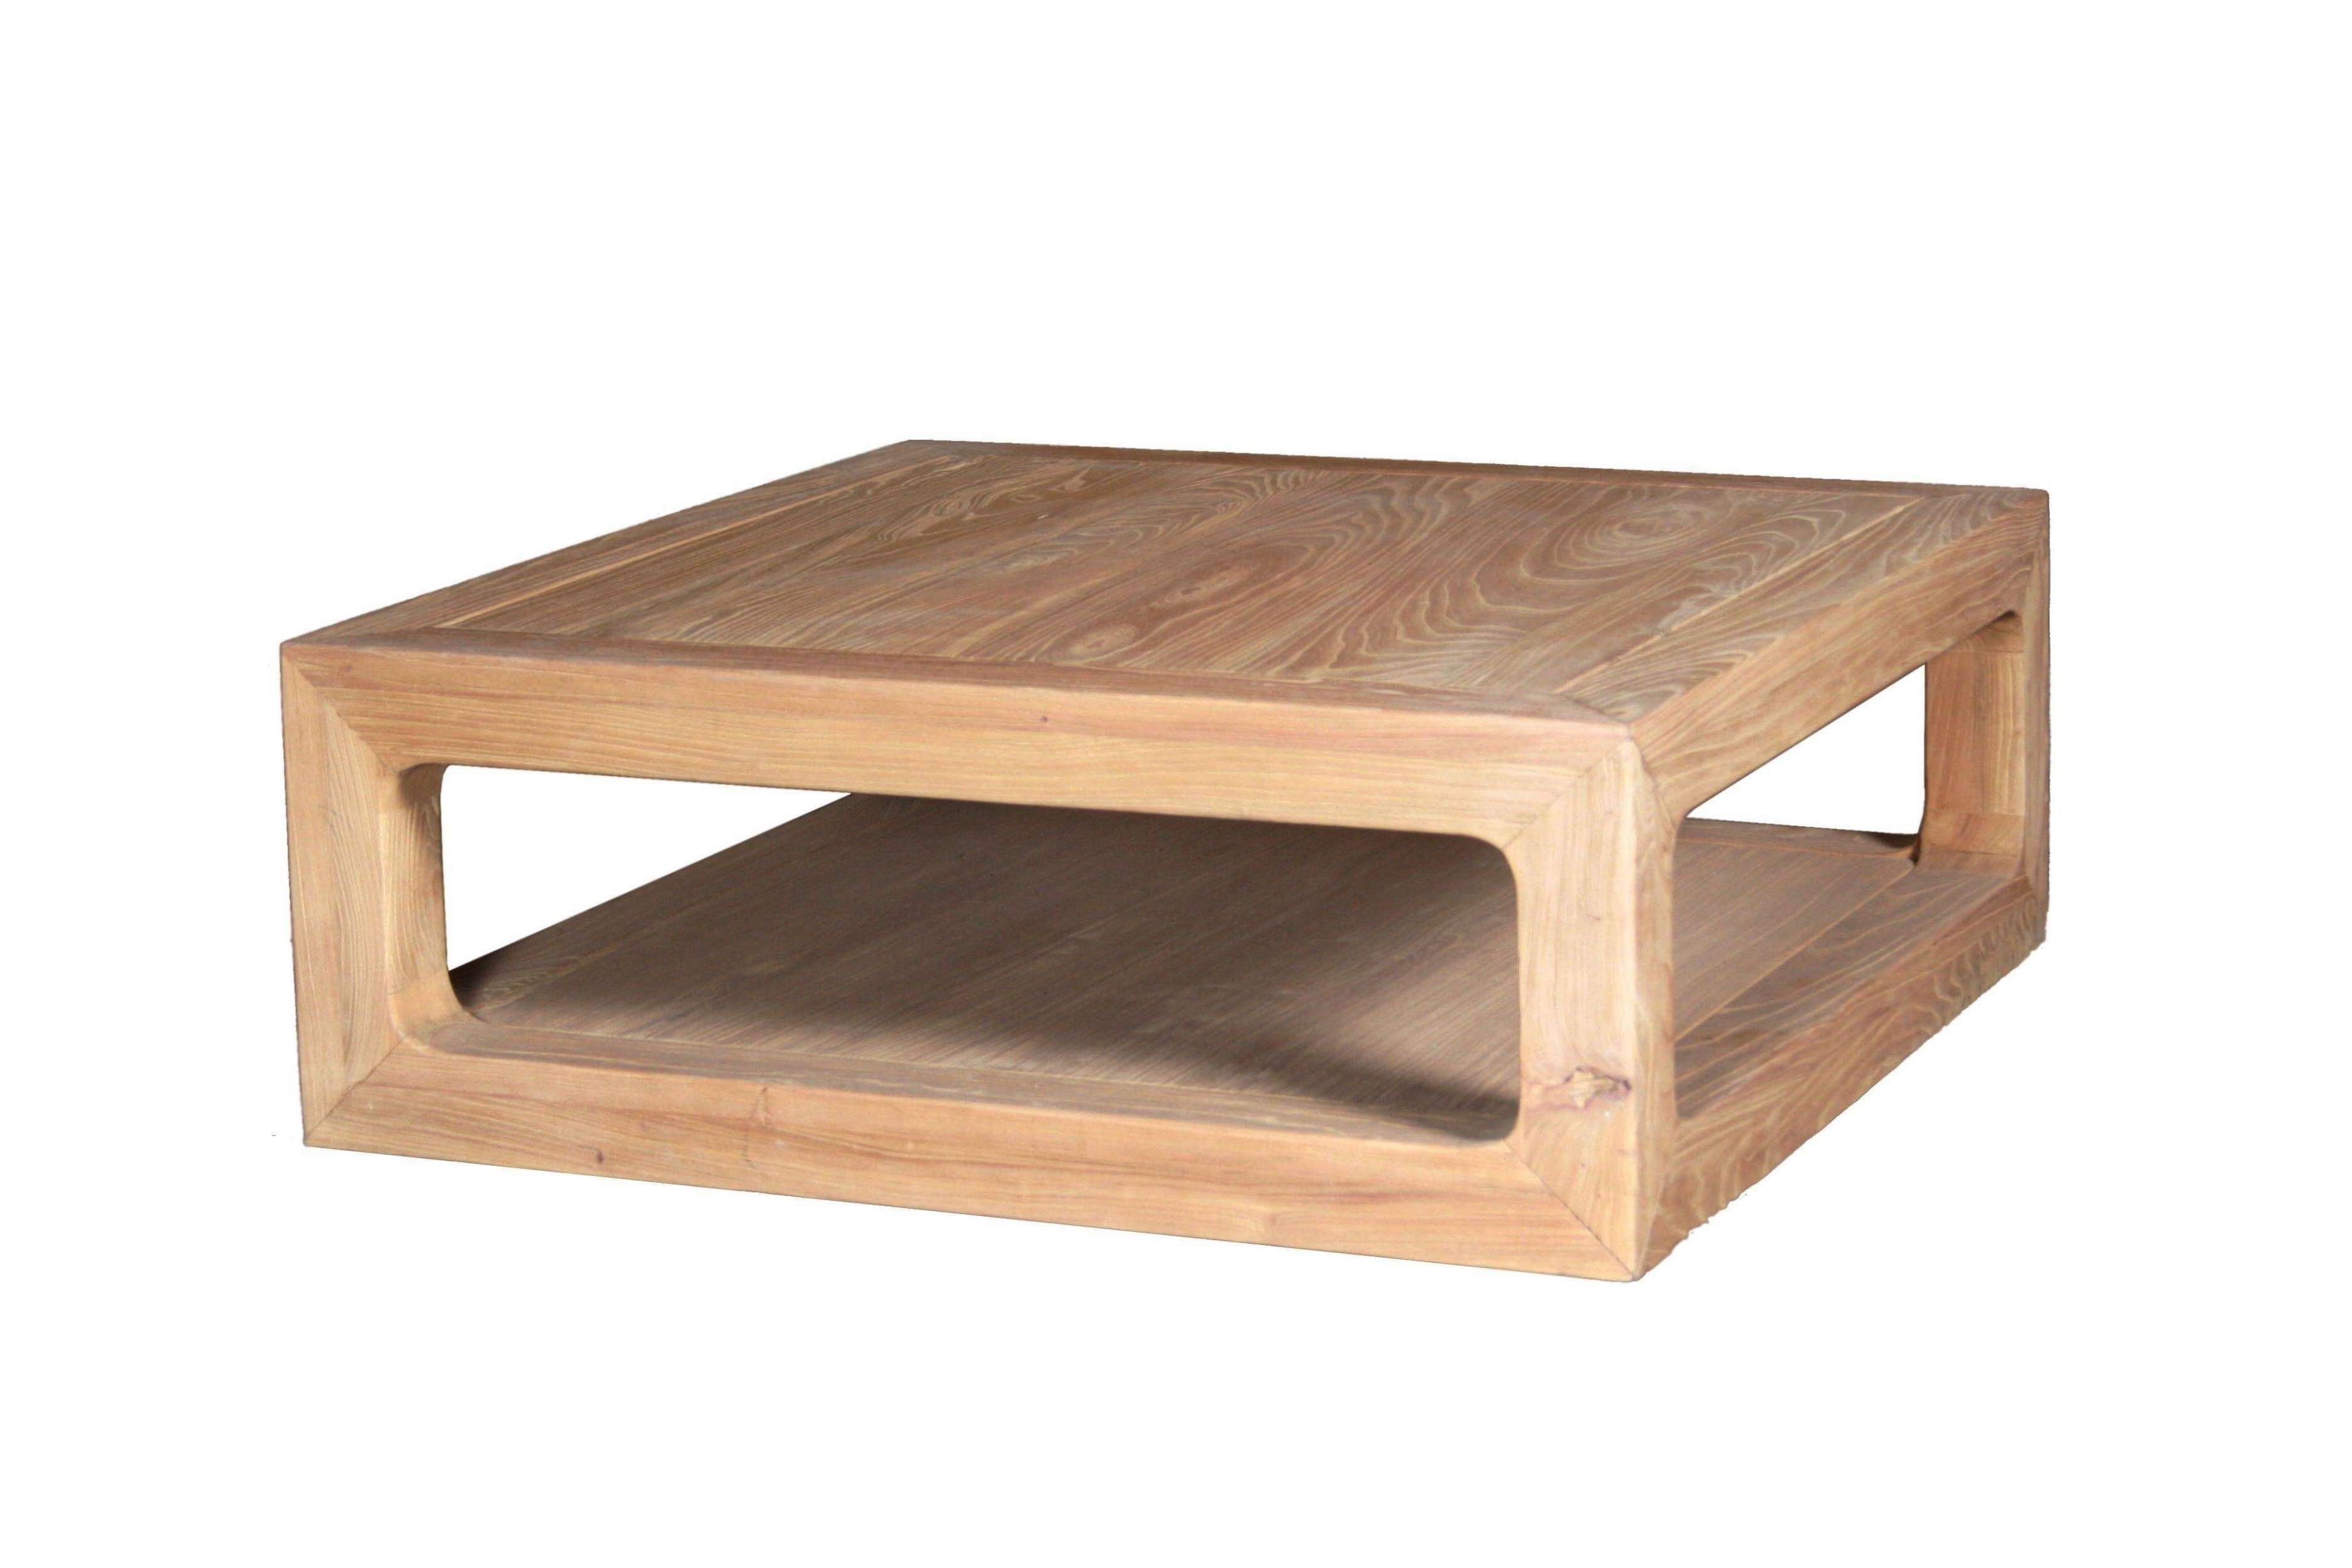 Well Known Low Wood Coffee Tables In Coffee Tables : Tables For Sale Coffee Table Price Cheap Wooden (Gallery 20 of 20)